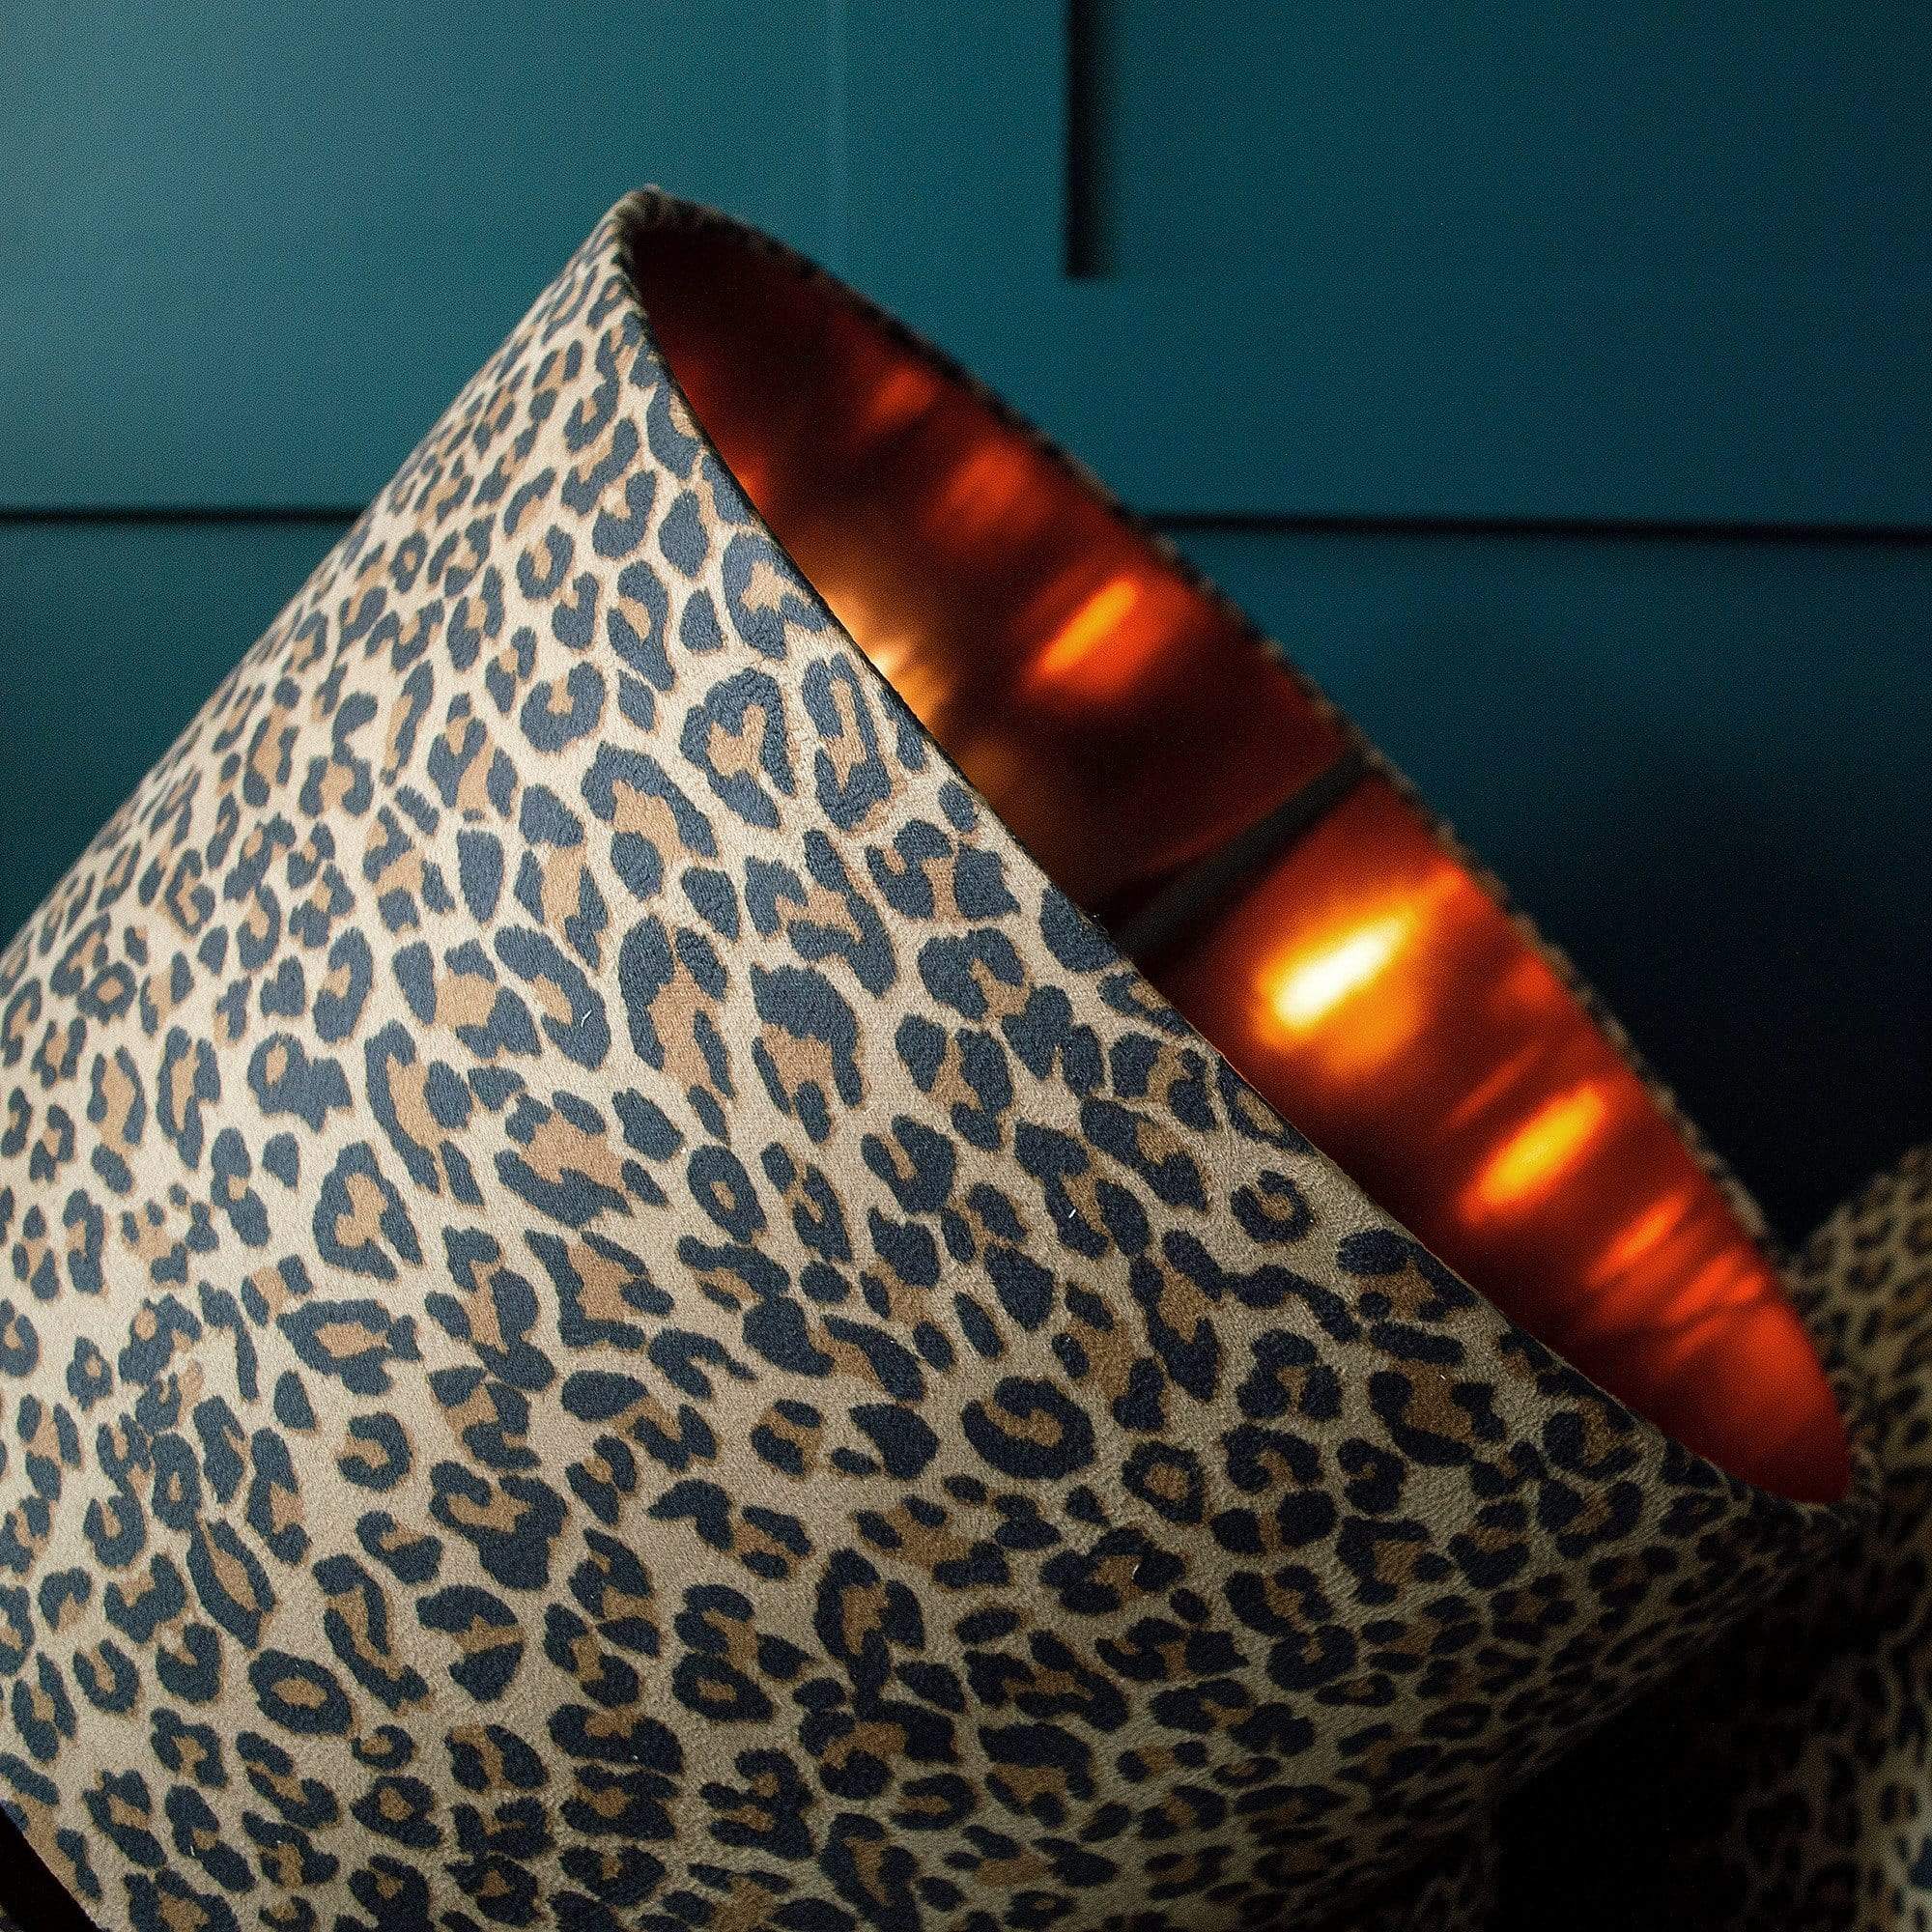 Leopard Print Lampshade with Metallic Lining